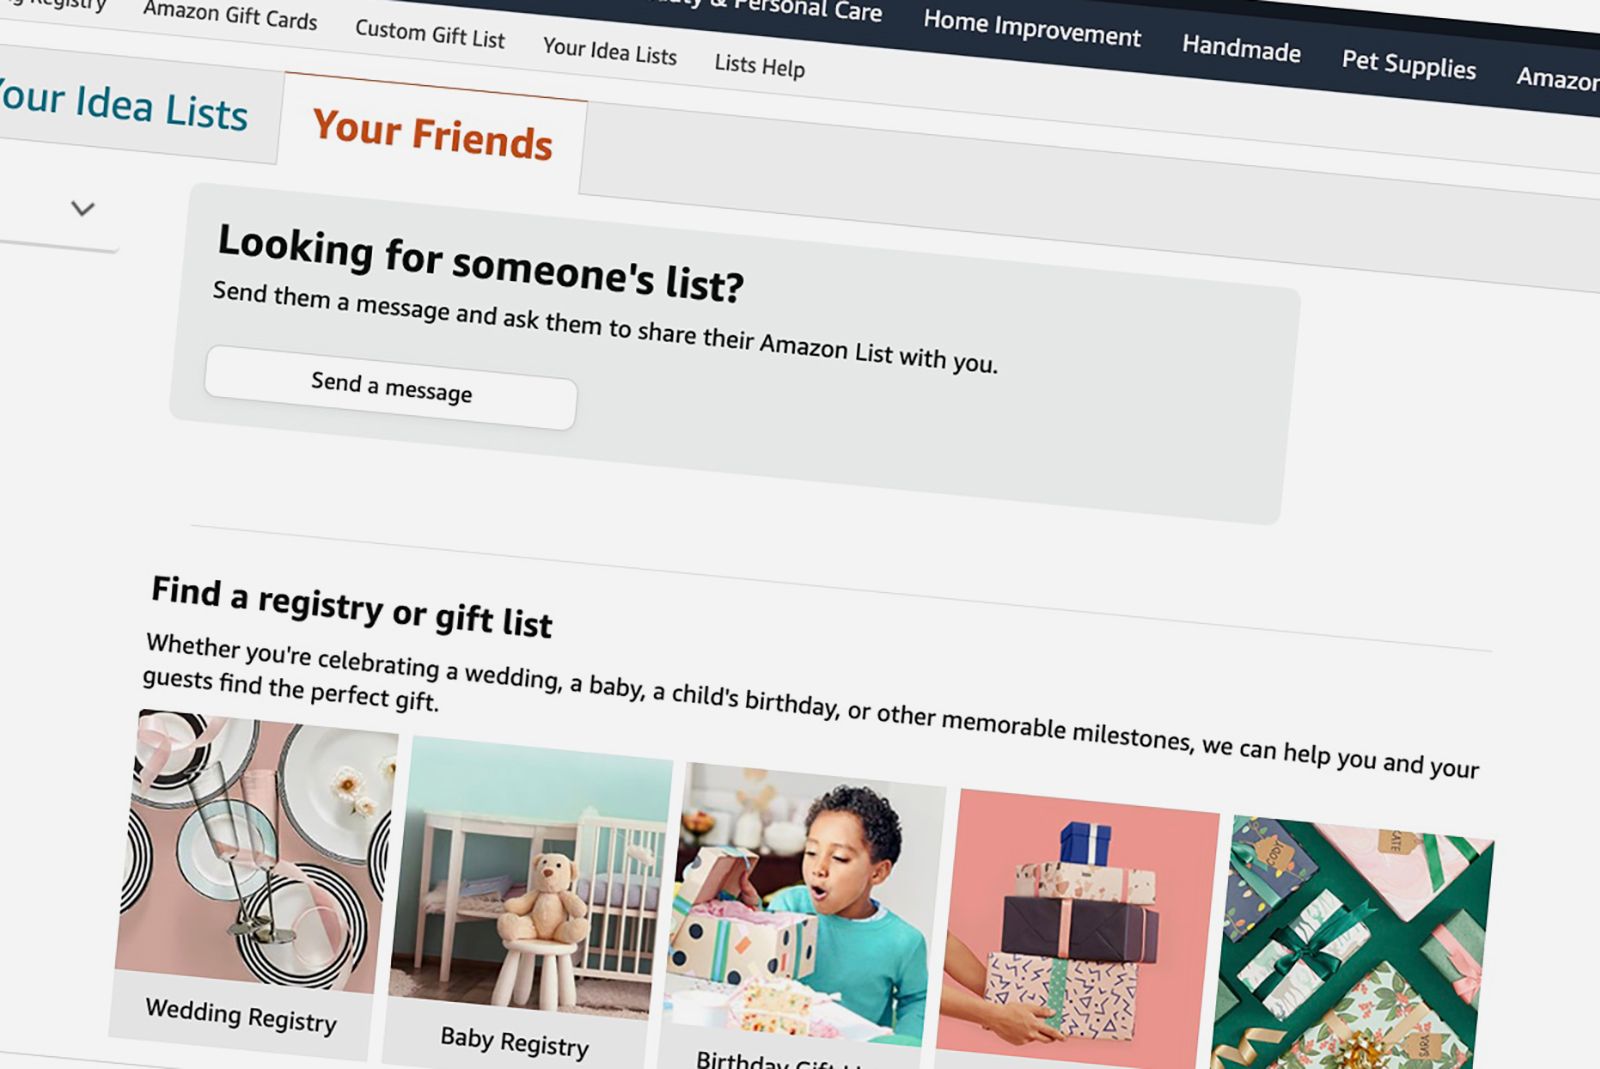 How to find someone's Amazon wish list (or request access to a friend's list) photo 1